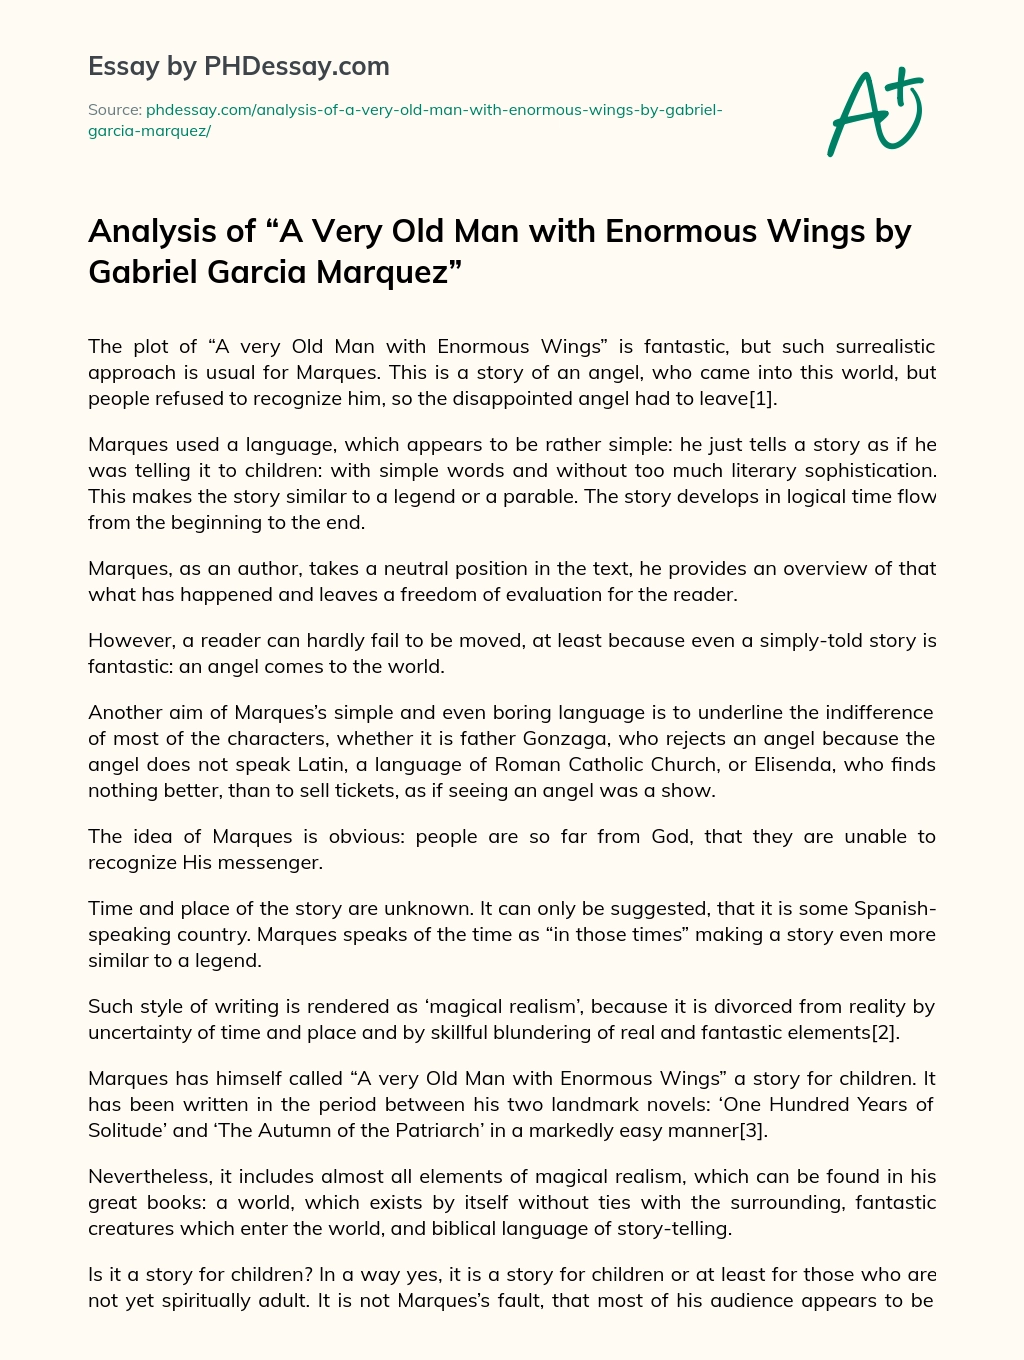 Analysis of “A Very Old Man with Enormous Wings by Gabriel Garcia Marquez” essay